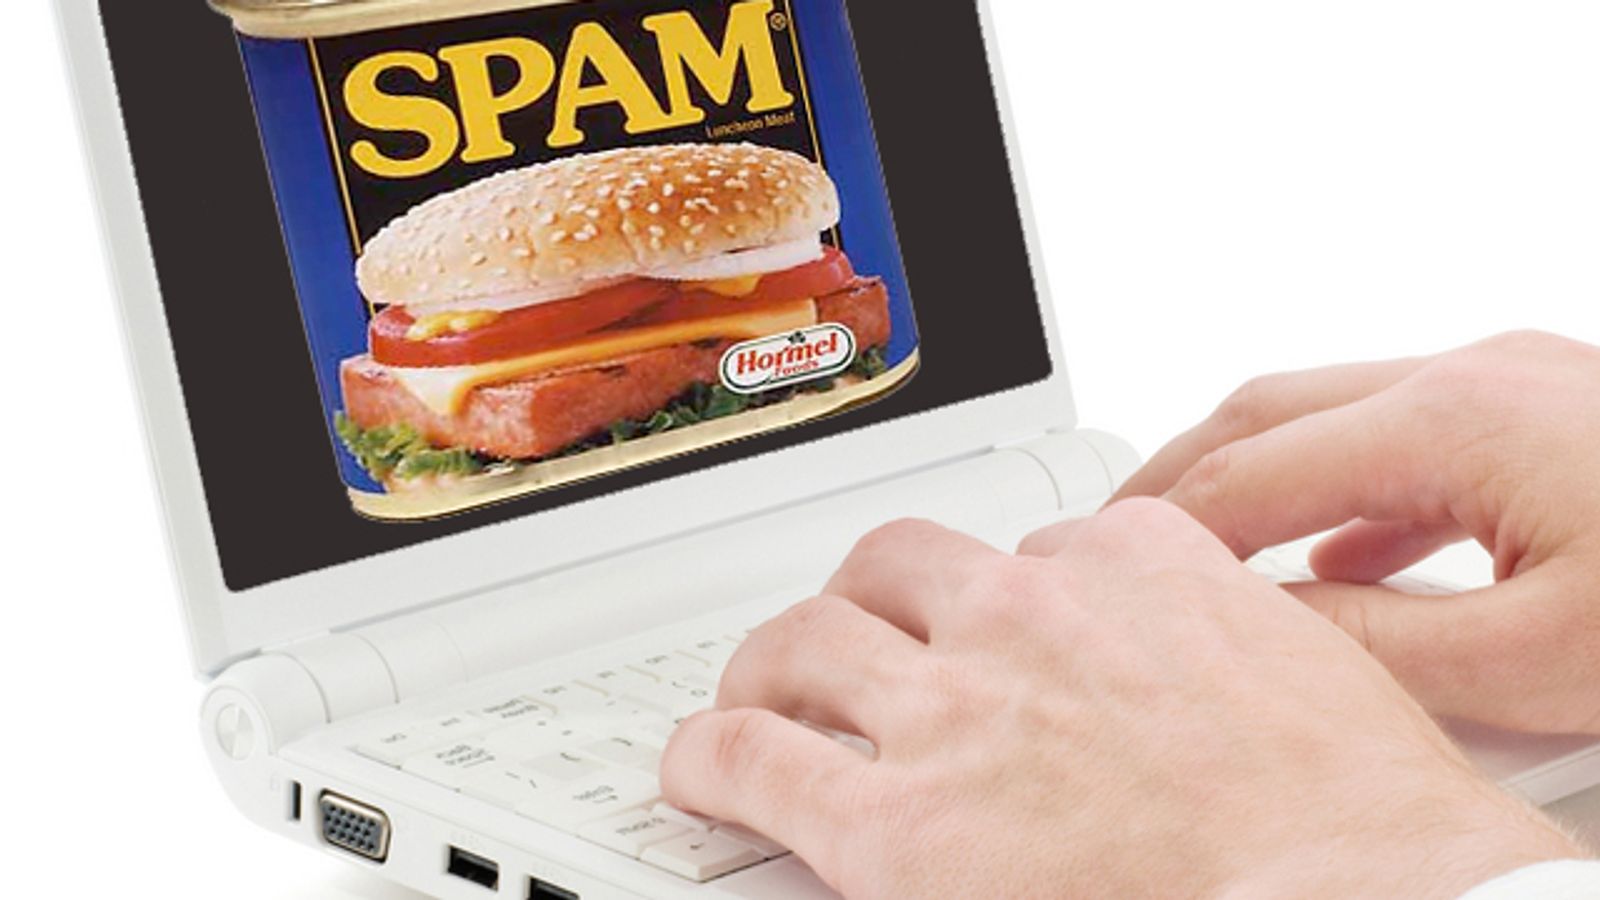 Microsoft: 97 Percent of E-mail Is Spam